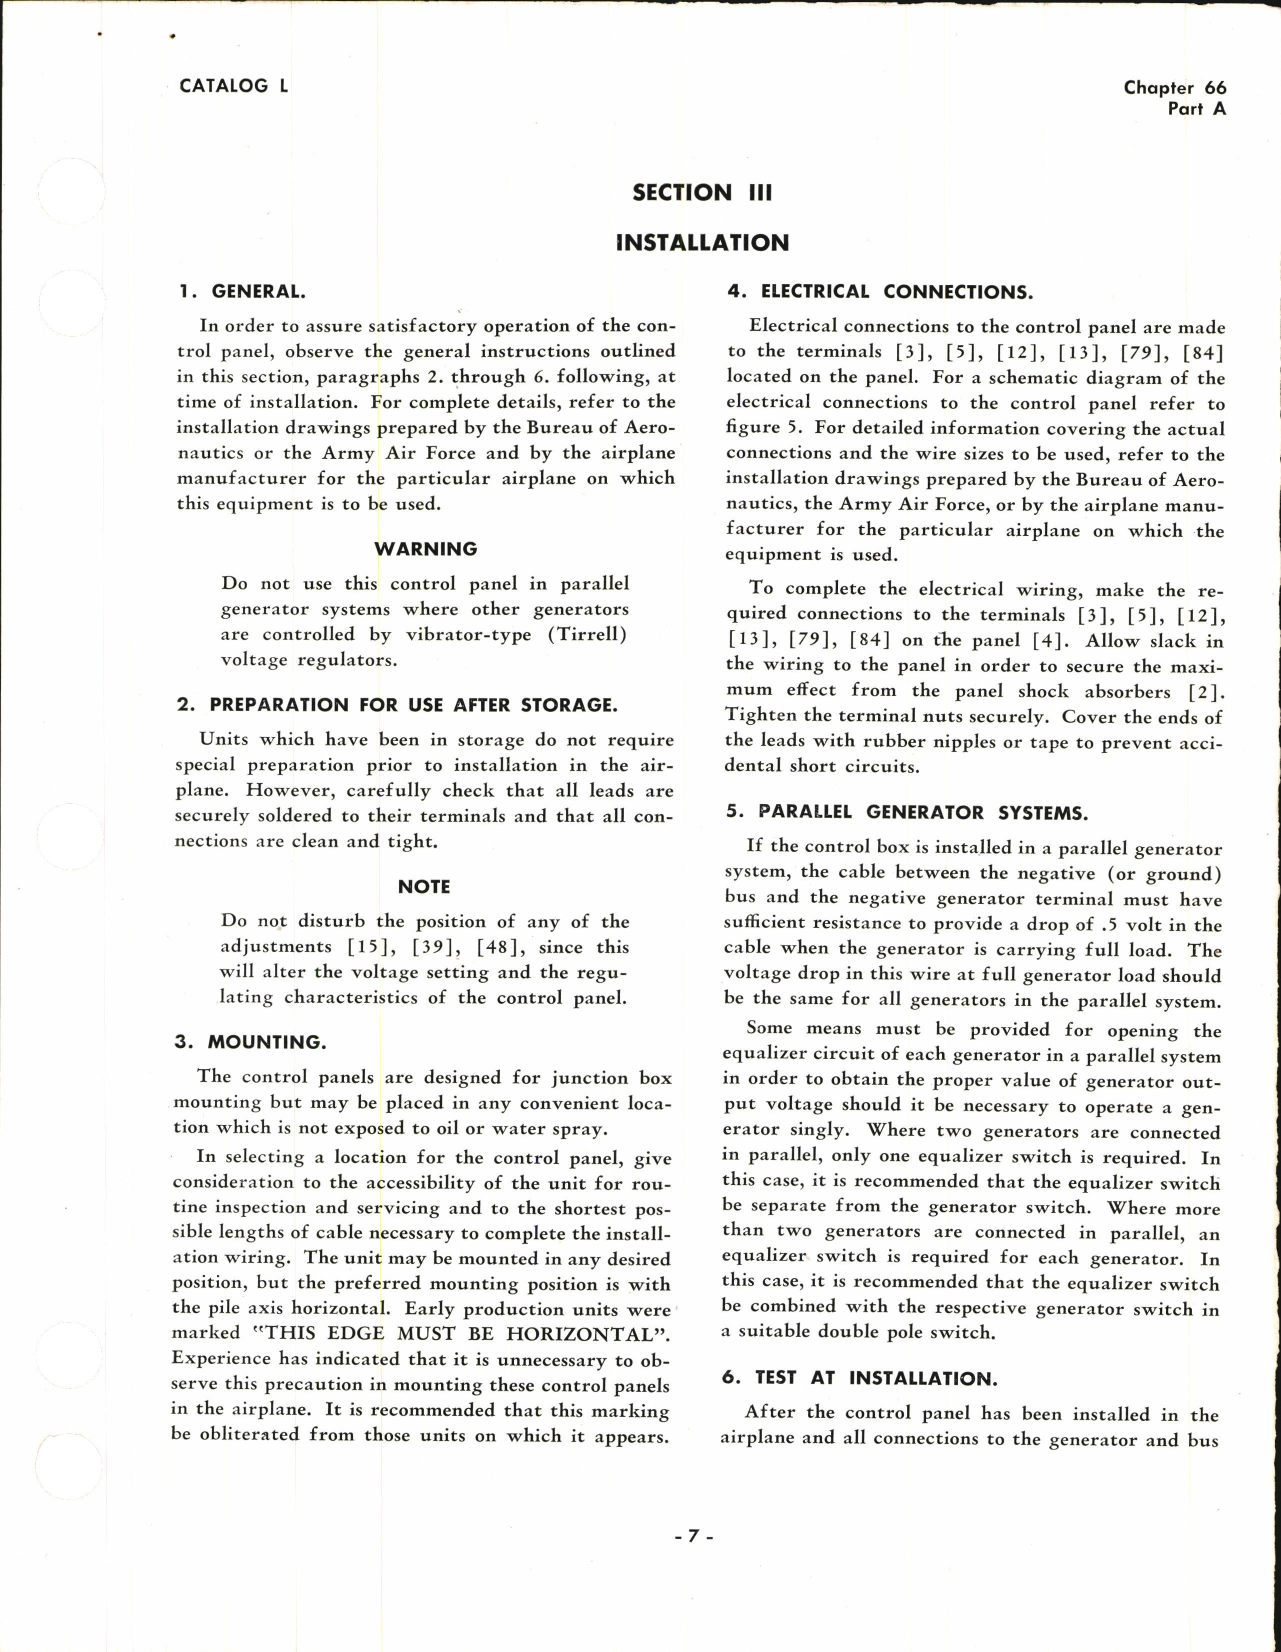 Sample page 7 from AirCorps Library document: Operating and Service Instructions for D-C Carbon Pile Voltage Regulator Control Panel Type 1202 Model 1